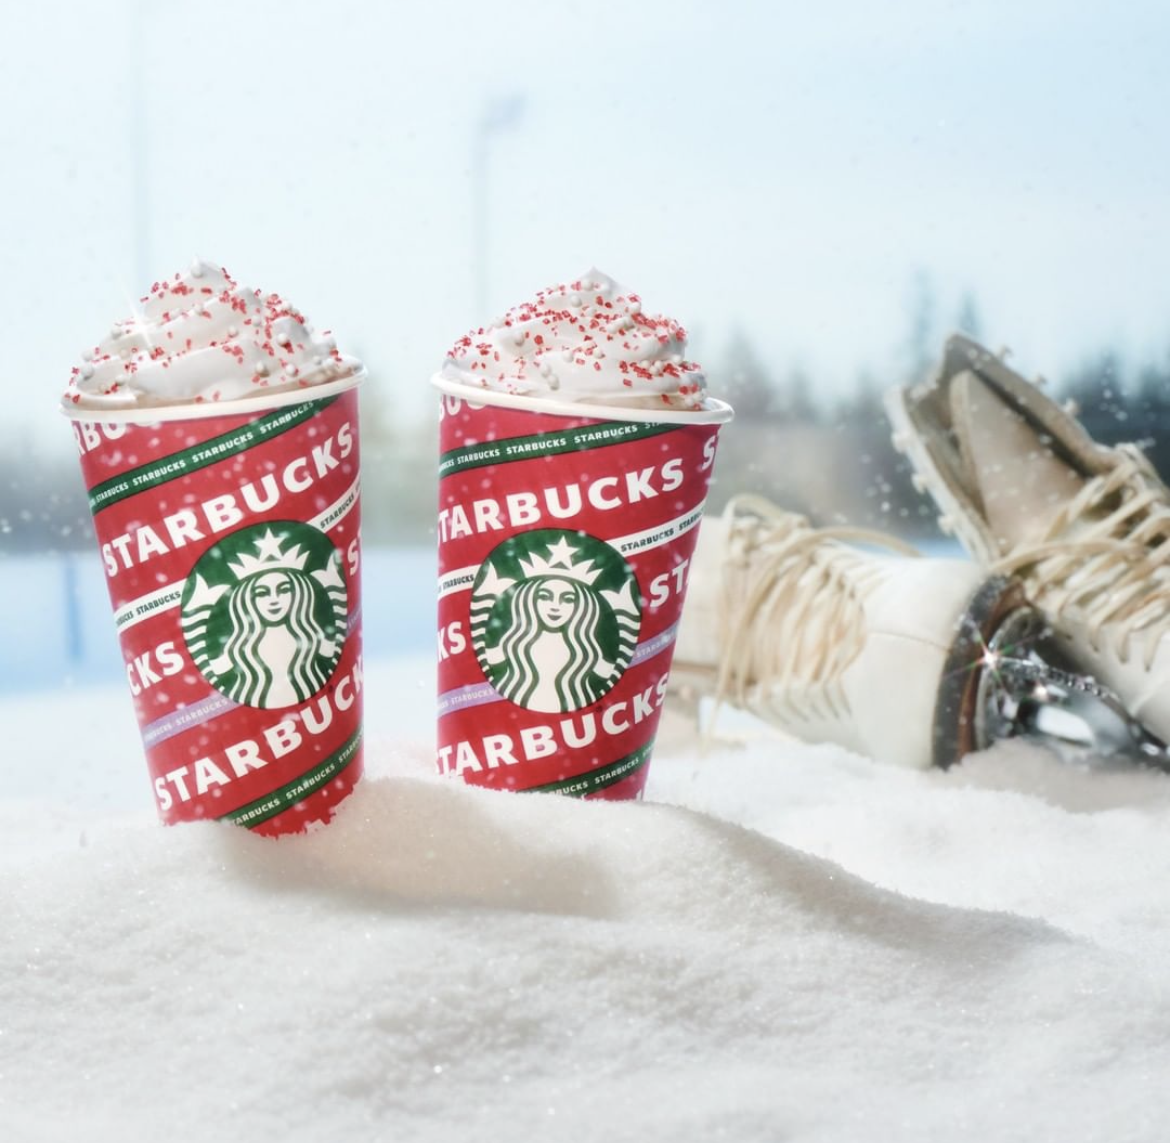 Starbucks holiday cups ranked from best to worst